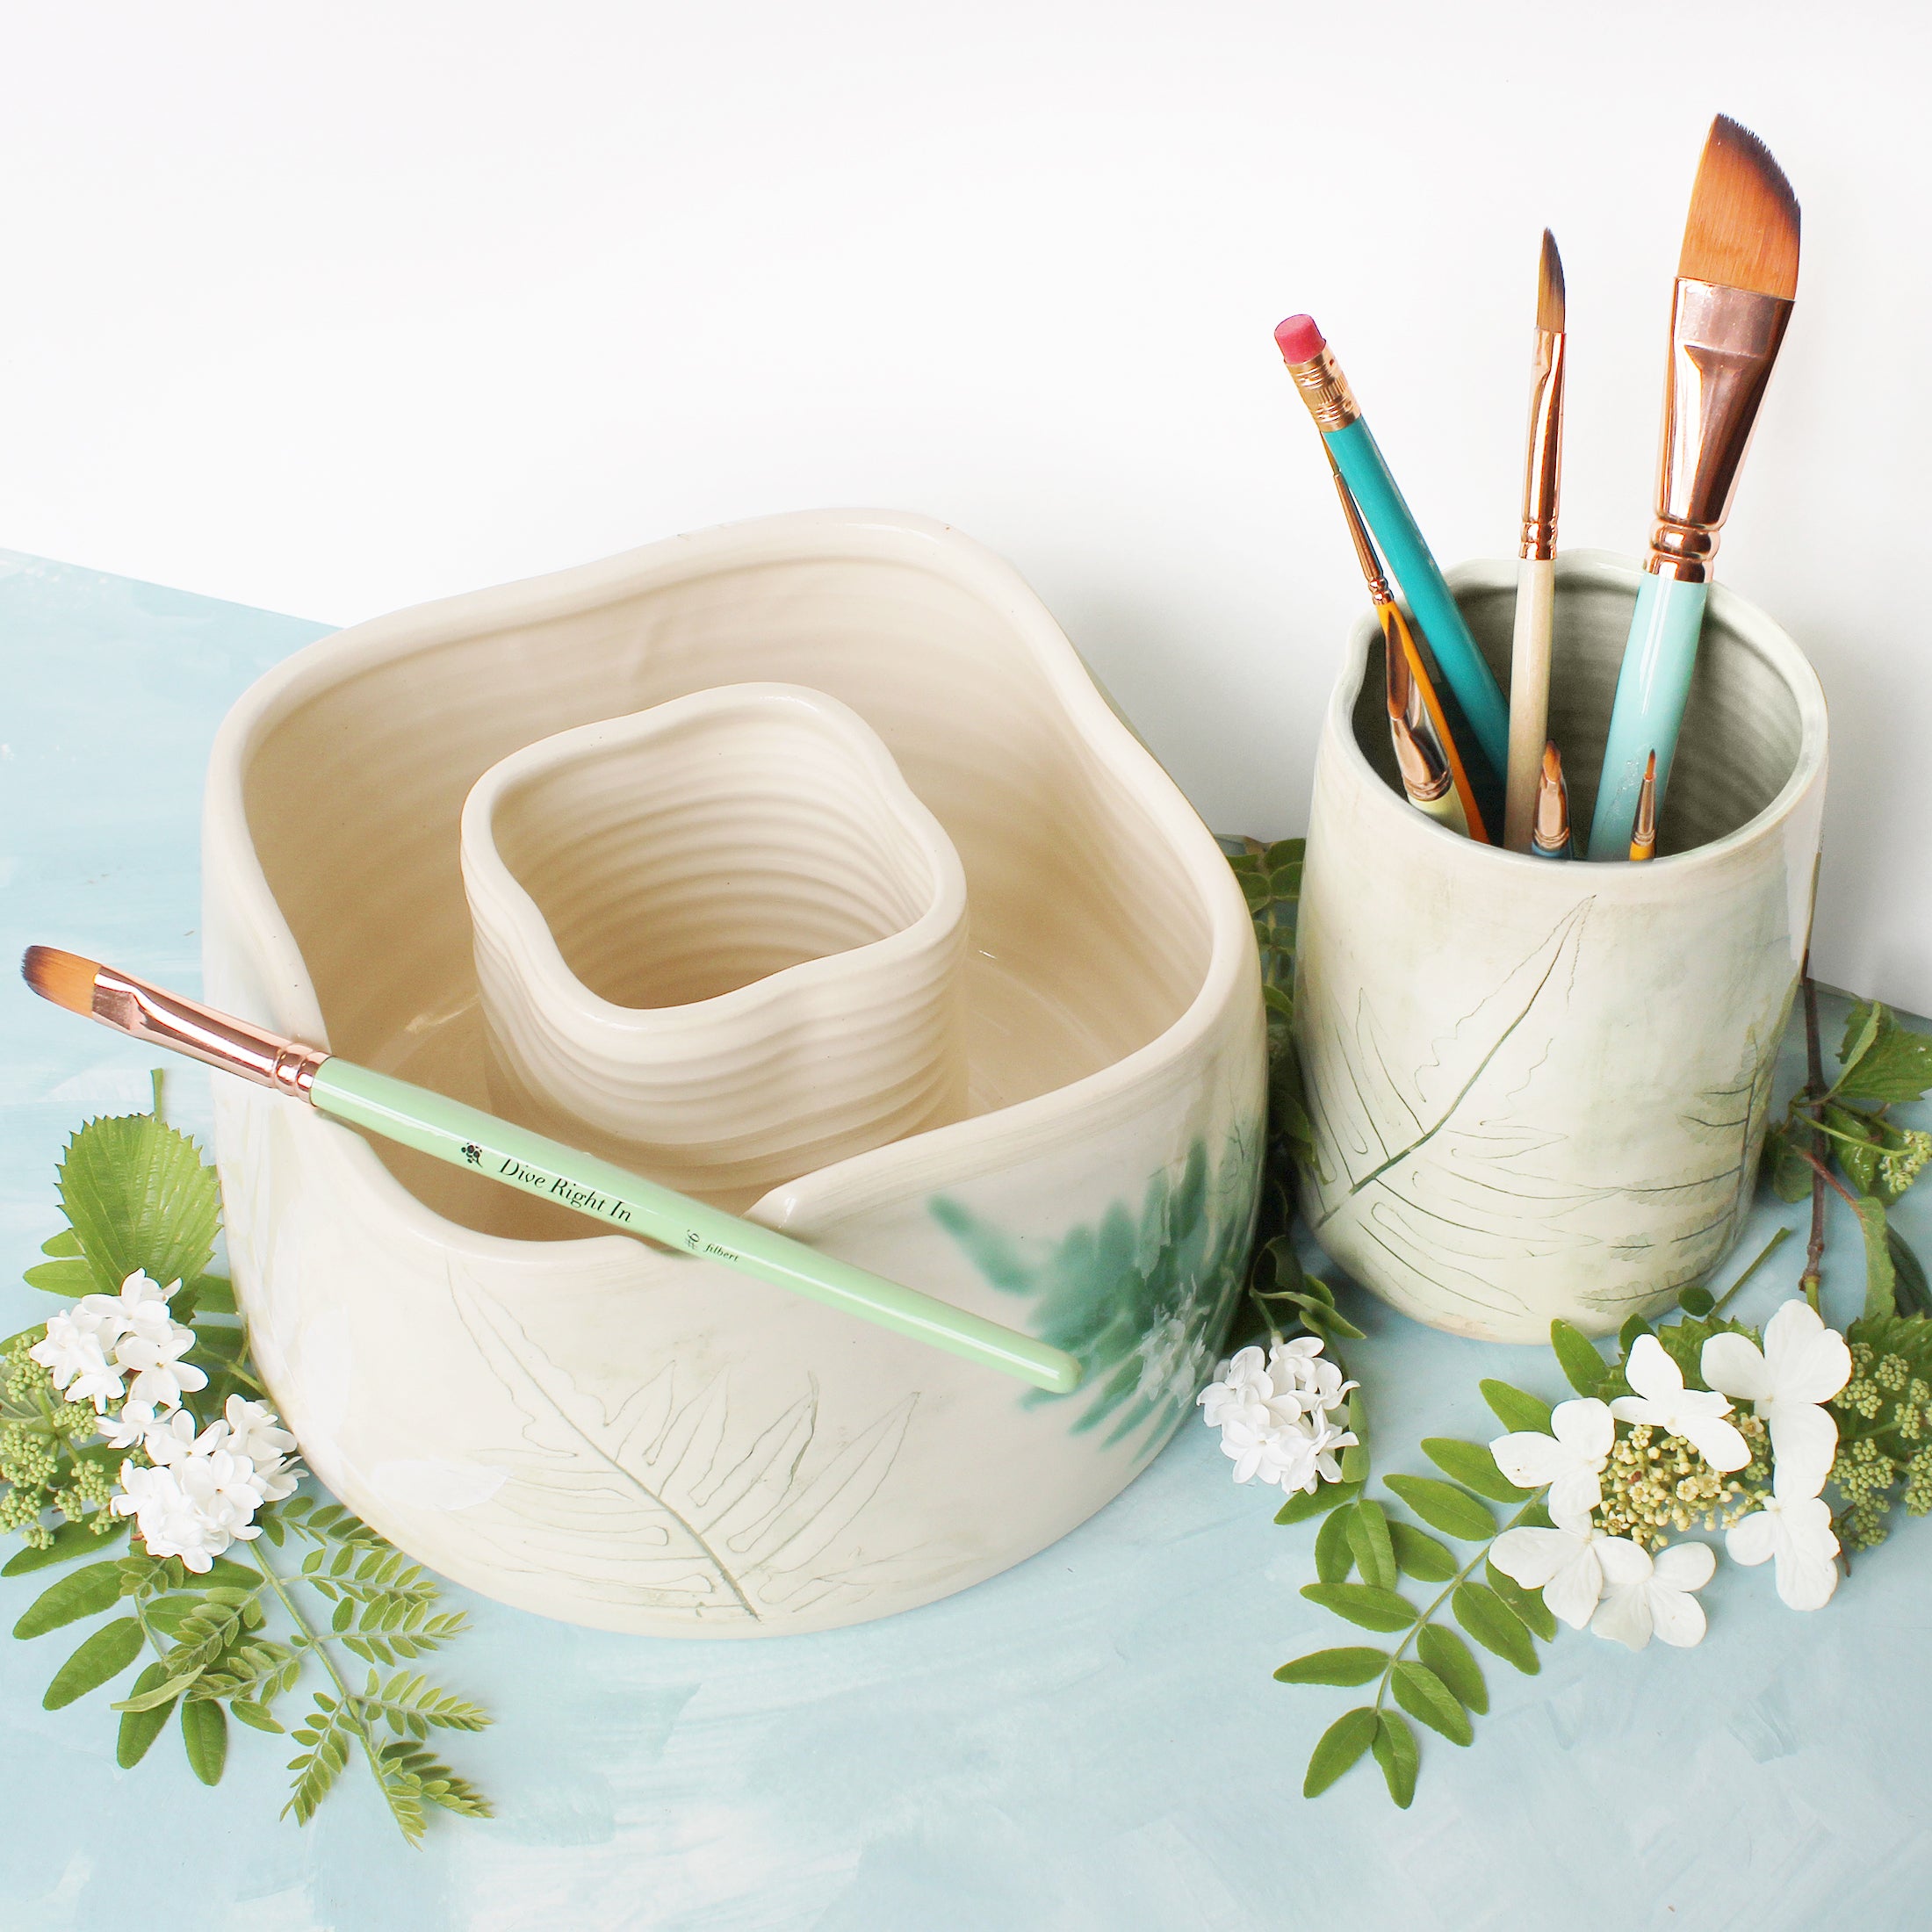 Special Edition Ceramic Brush Holder - Ferns - Unique Shopping for Artistic  Gifts